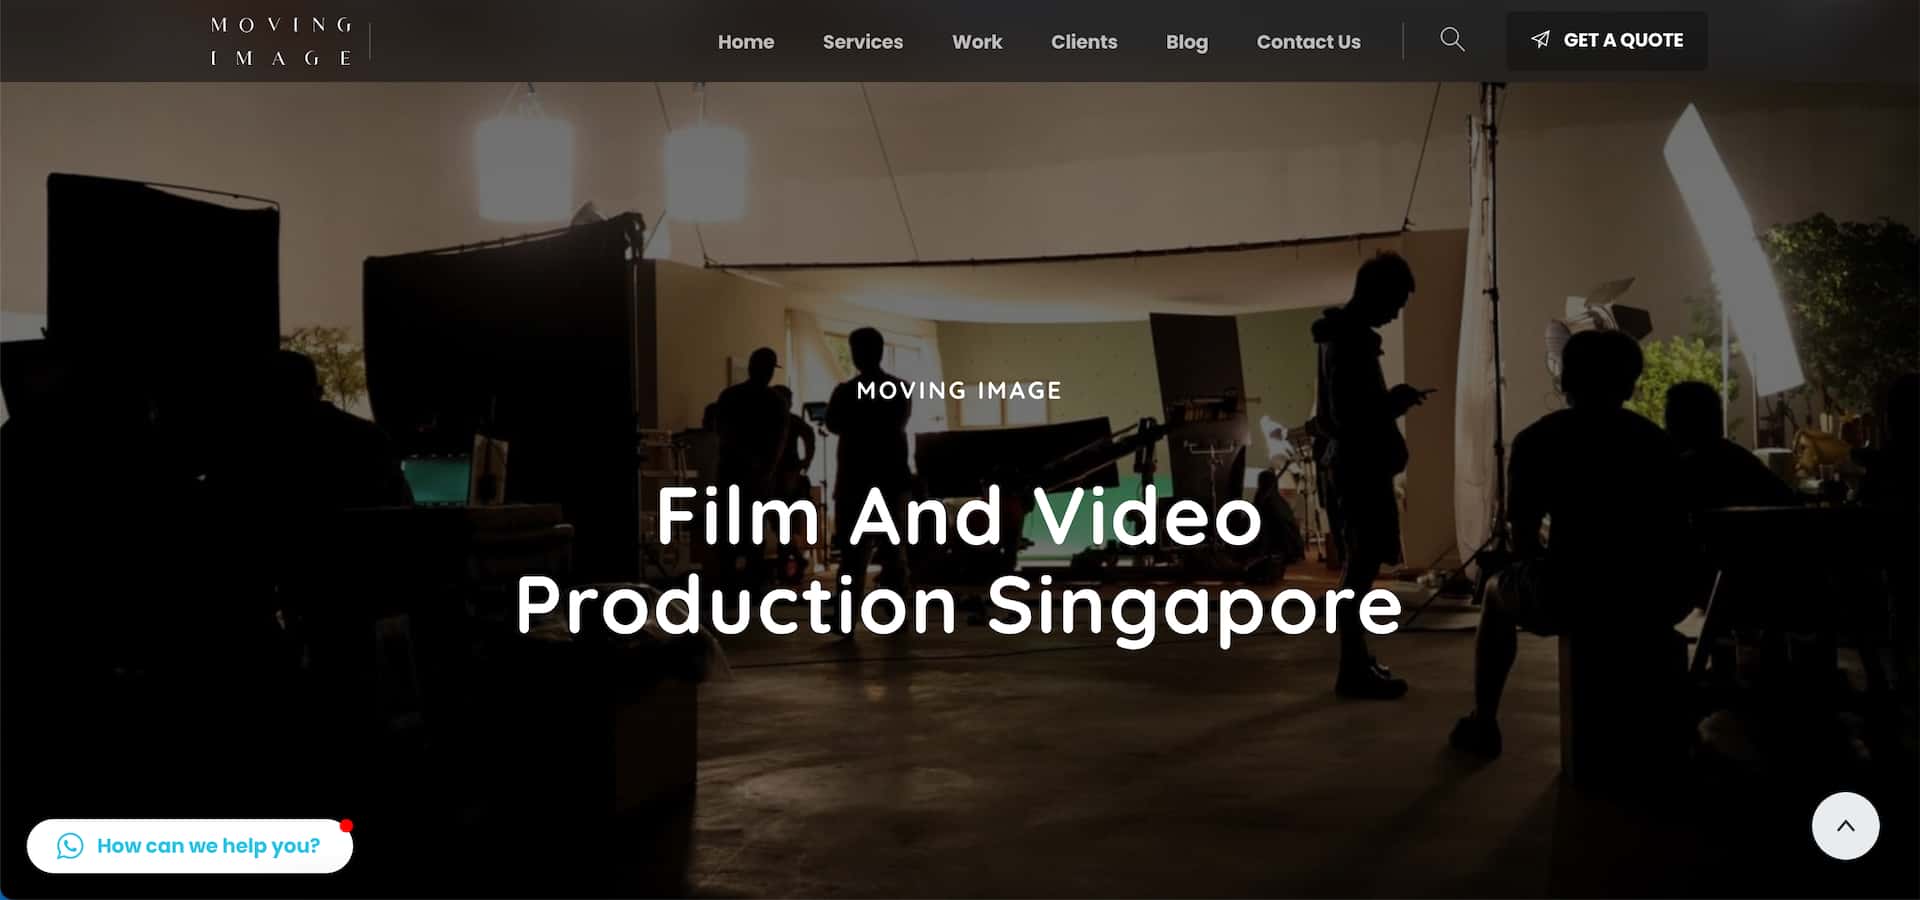 Moving Image 2D 3D Animation Company in Singapore